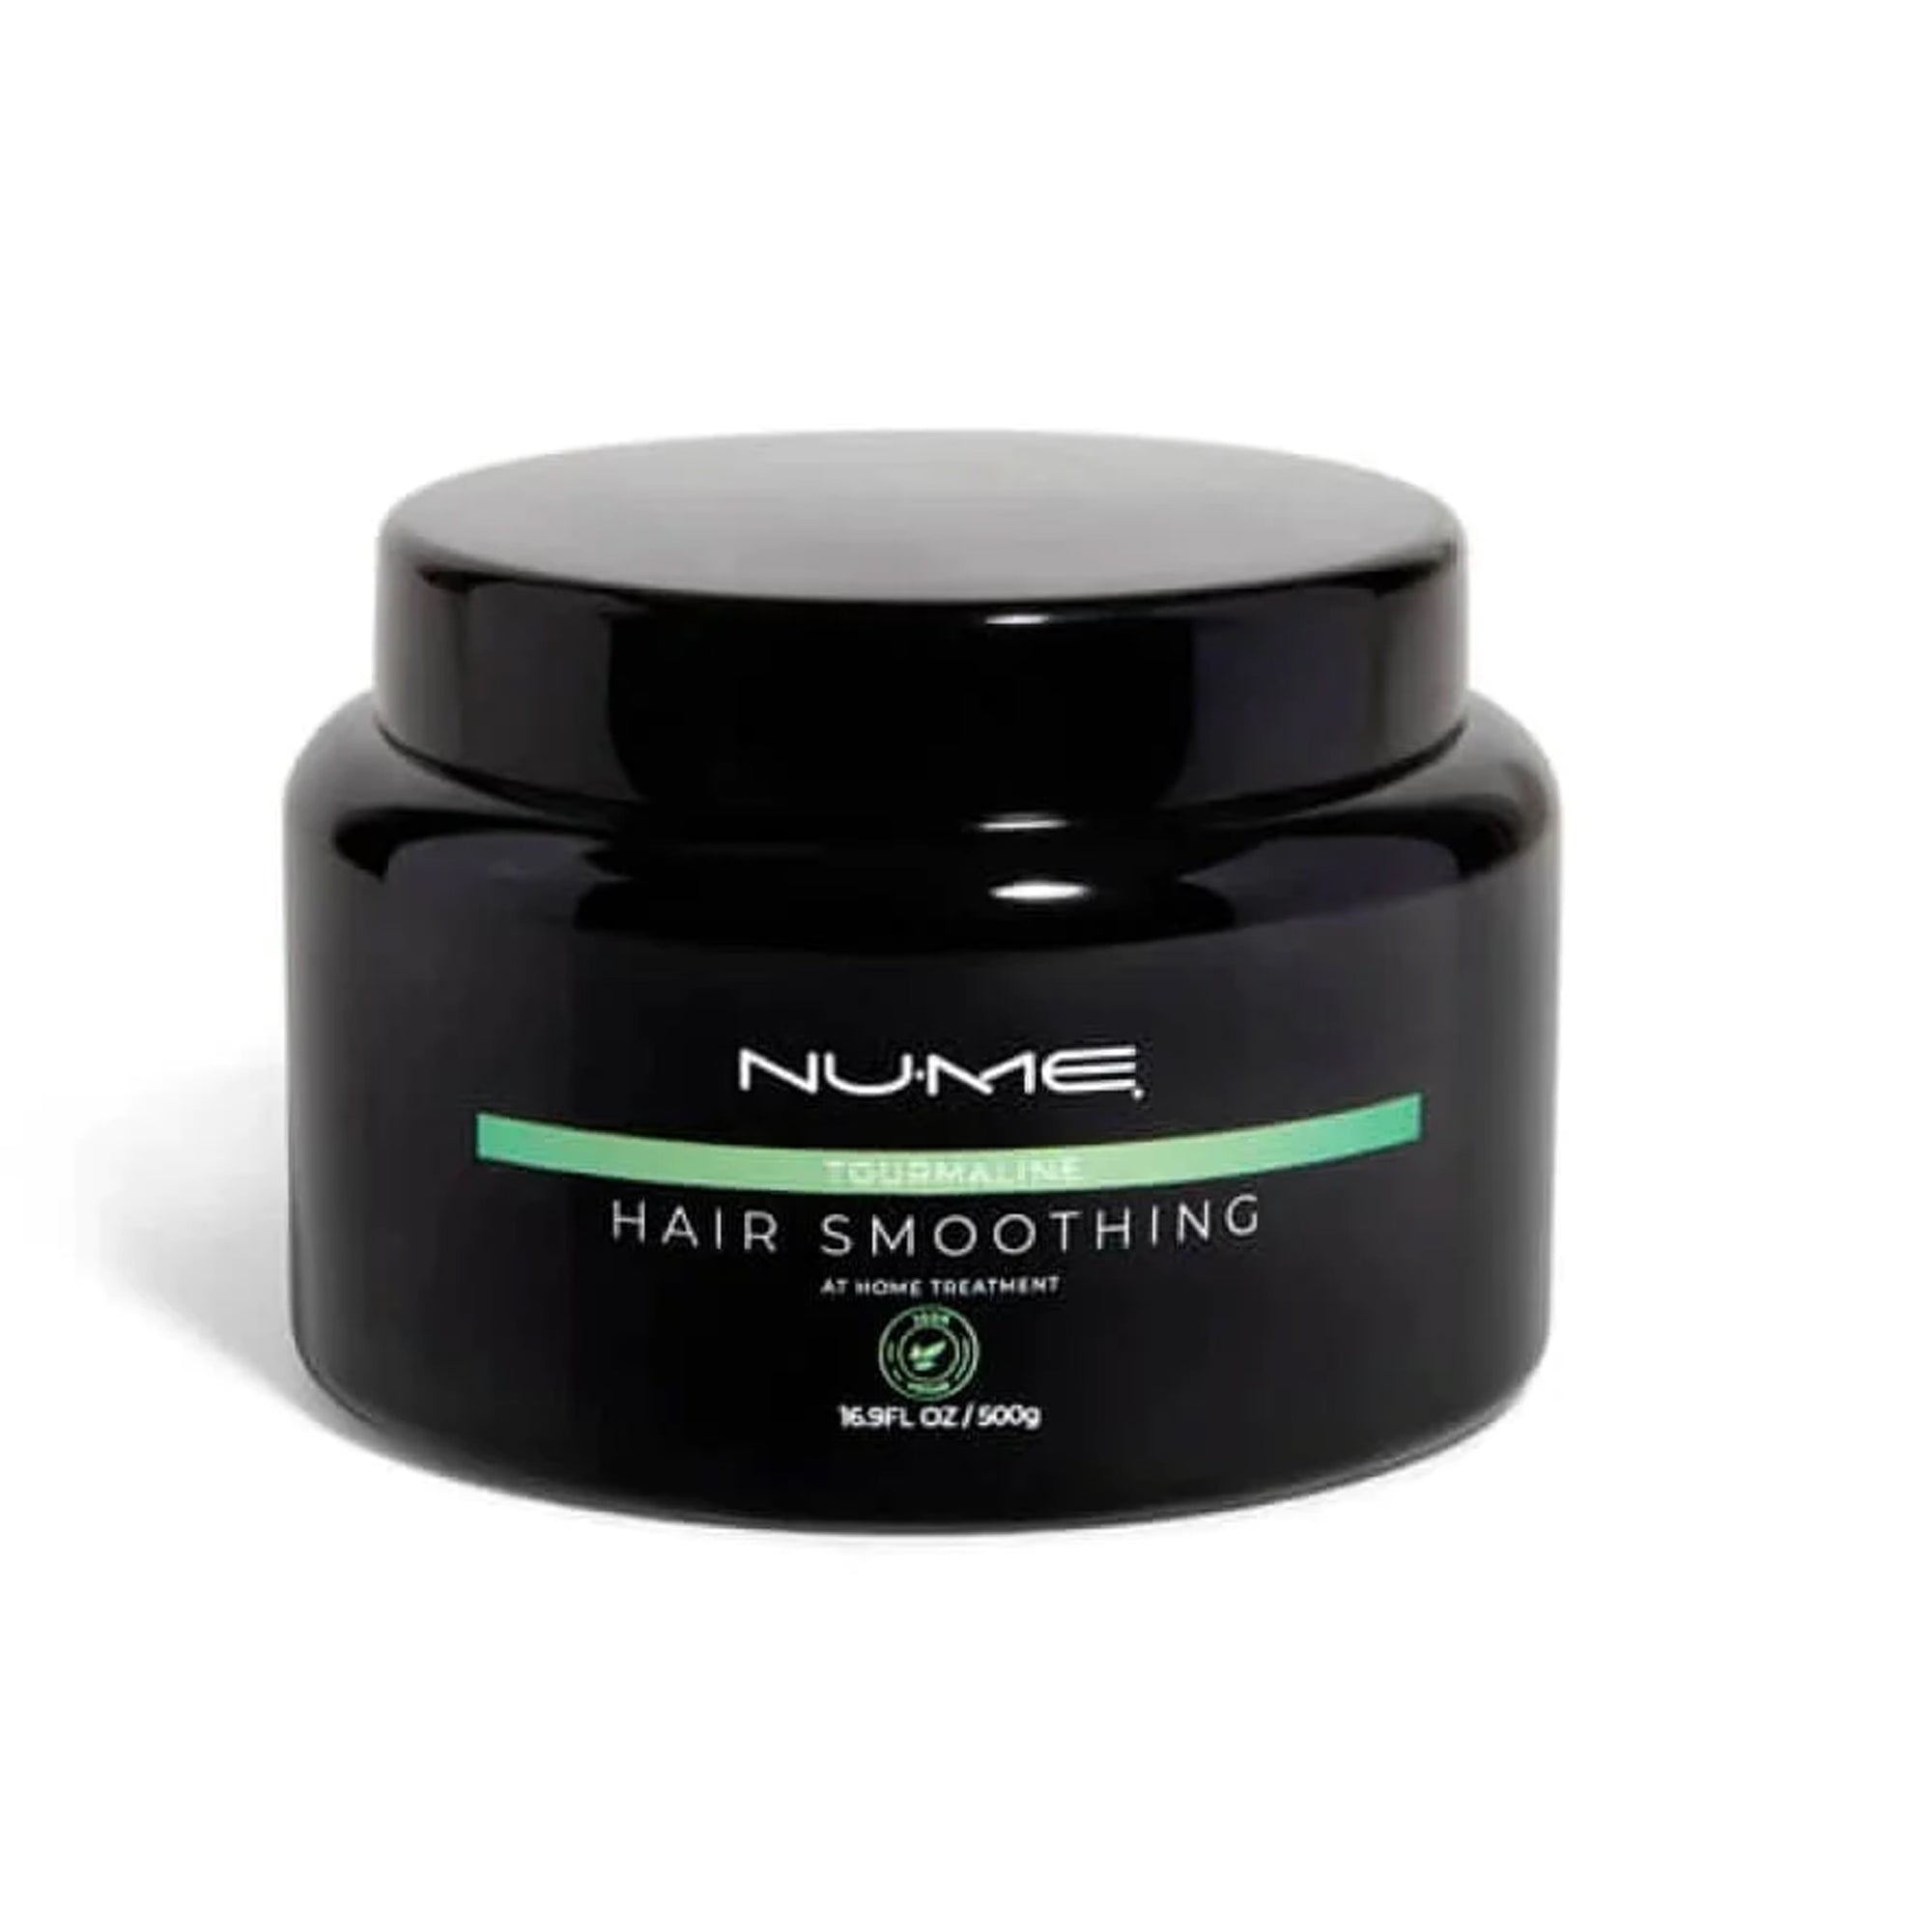 NuMe Vegan Tourmaline Hair Smoothing At Home Treatment